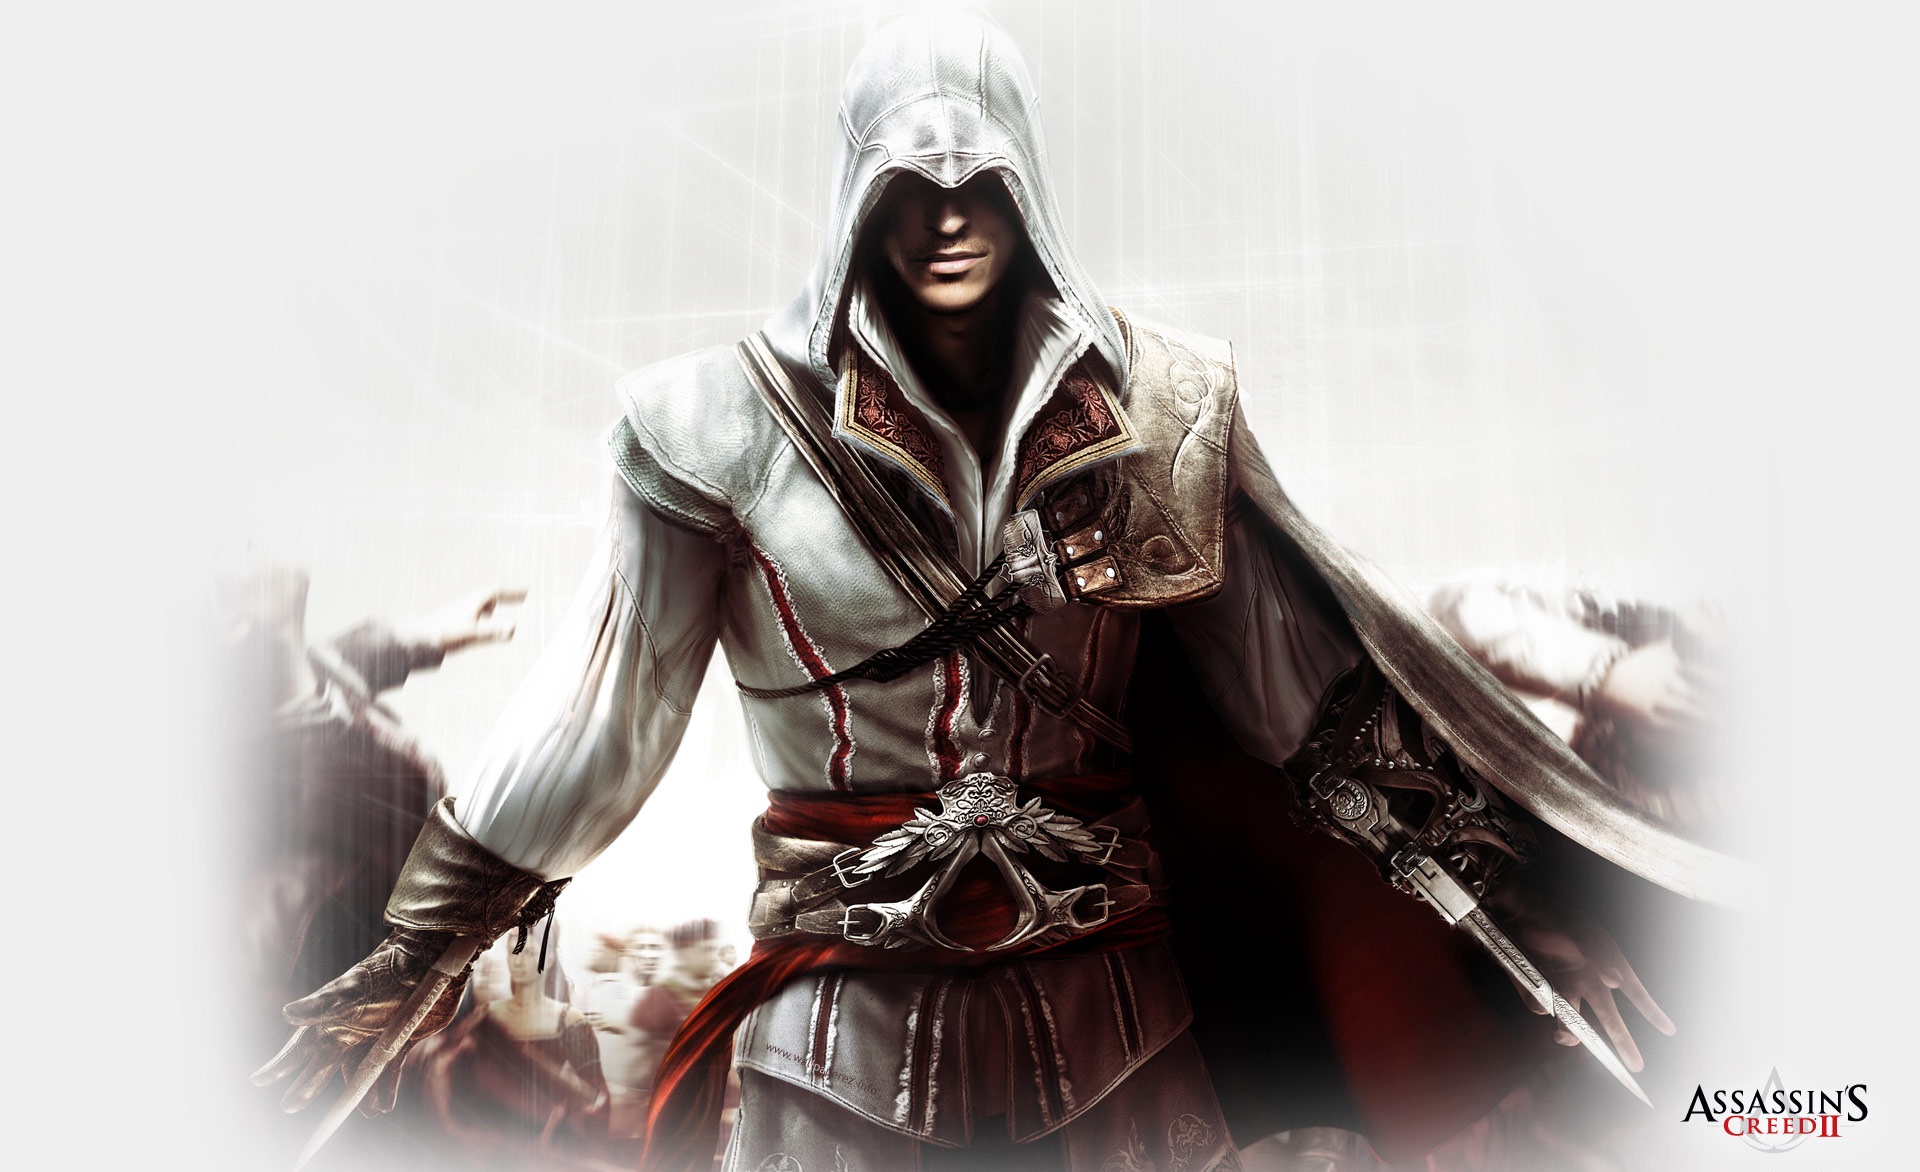 vertical wallpaper assassin's creed ii, assassin's creed, video game